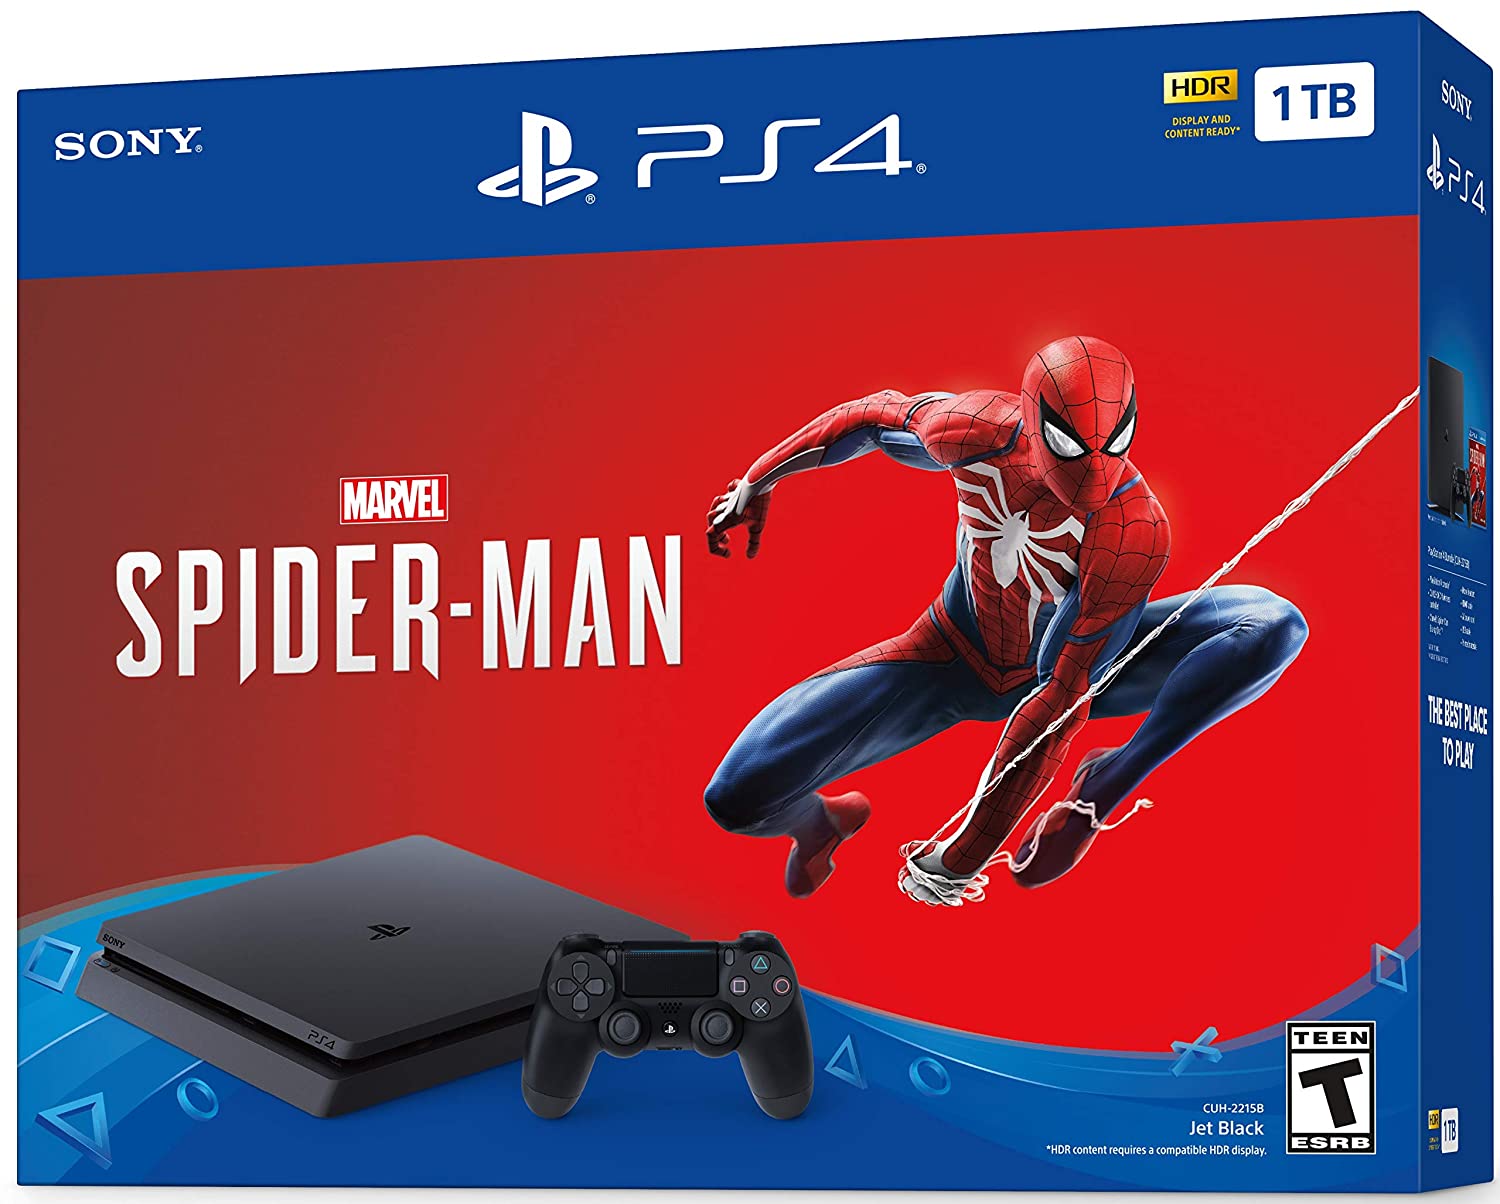 playstation prime day deals